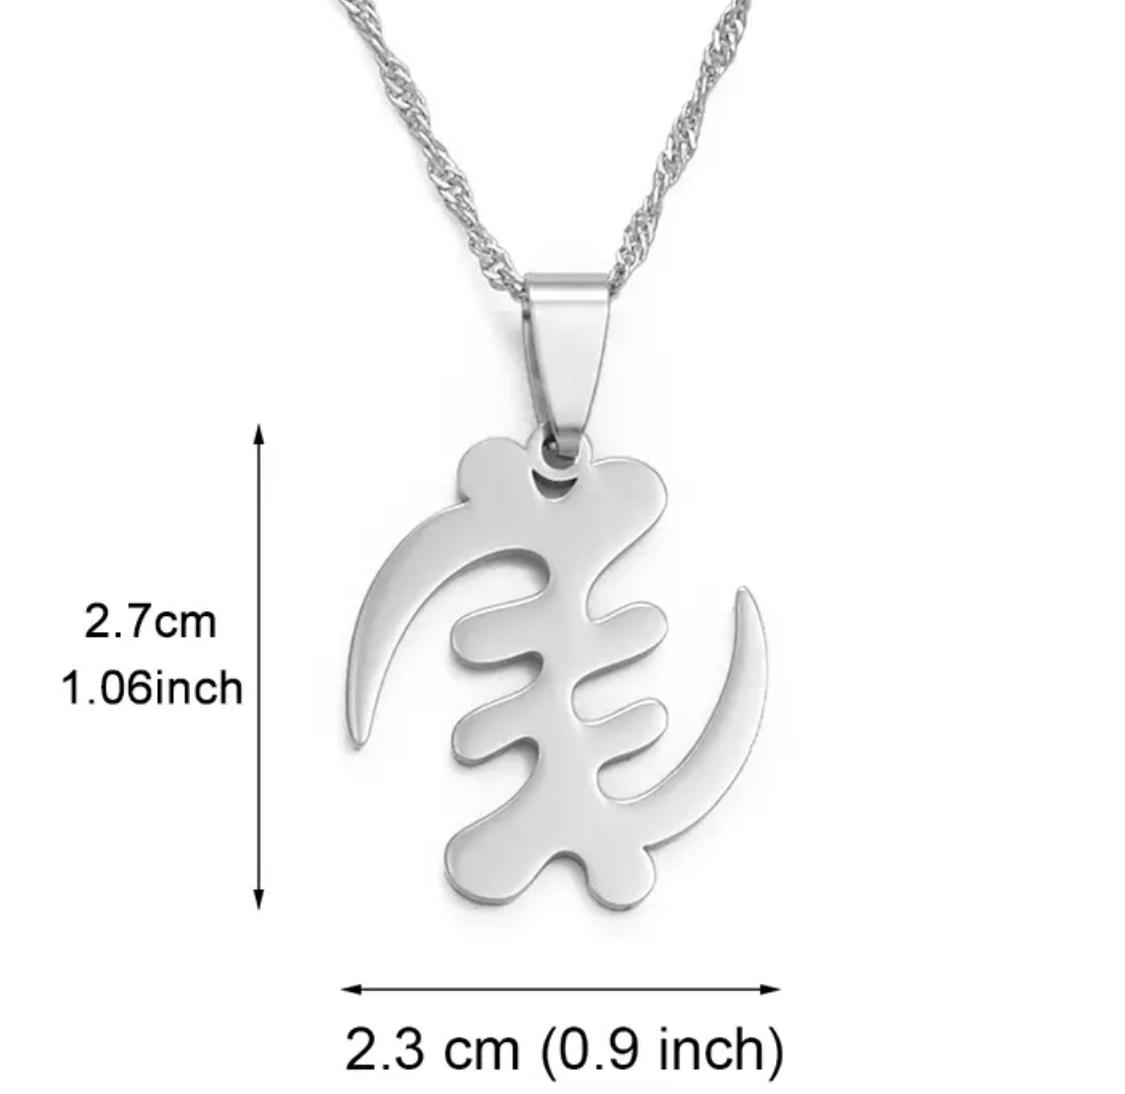 Gold Color Stainless Steel Adinkra Gye Nyame Ethnic Jewelry